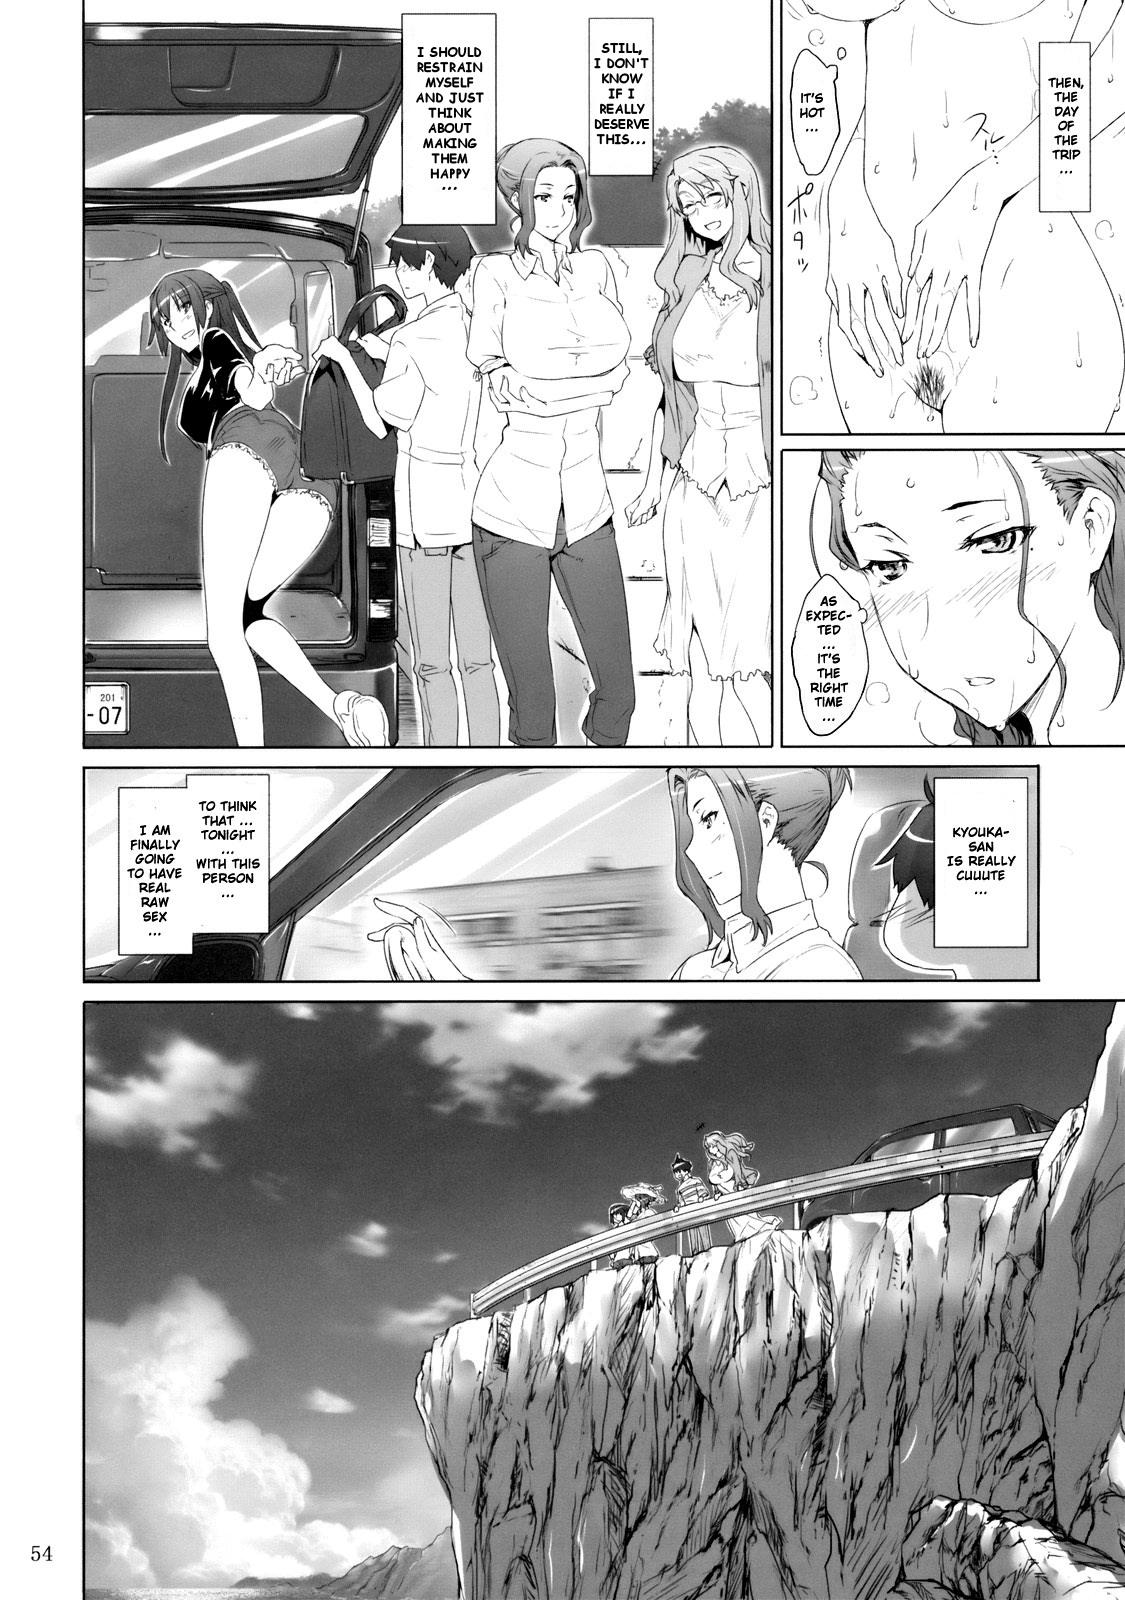 Rico Mtsp - Tachibana-san's Circumstabces WIth a Man 2 Interview - Page 3